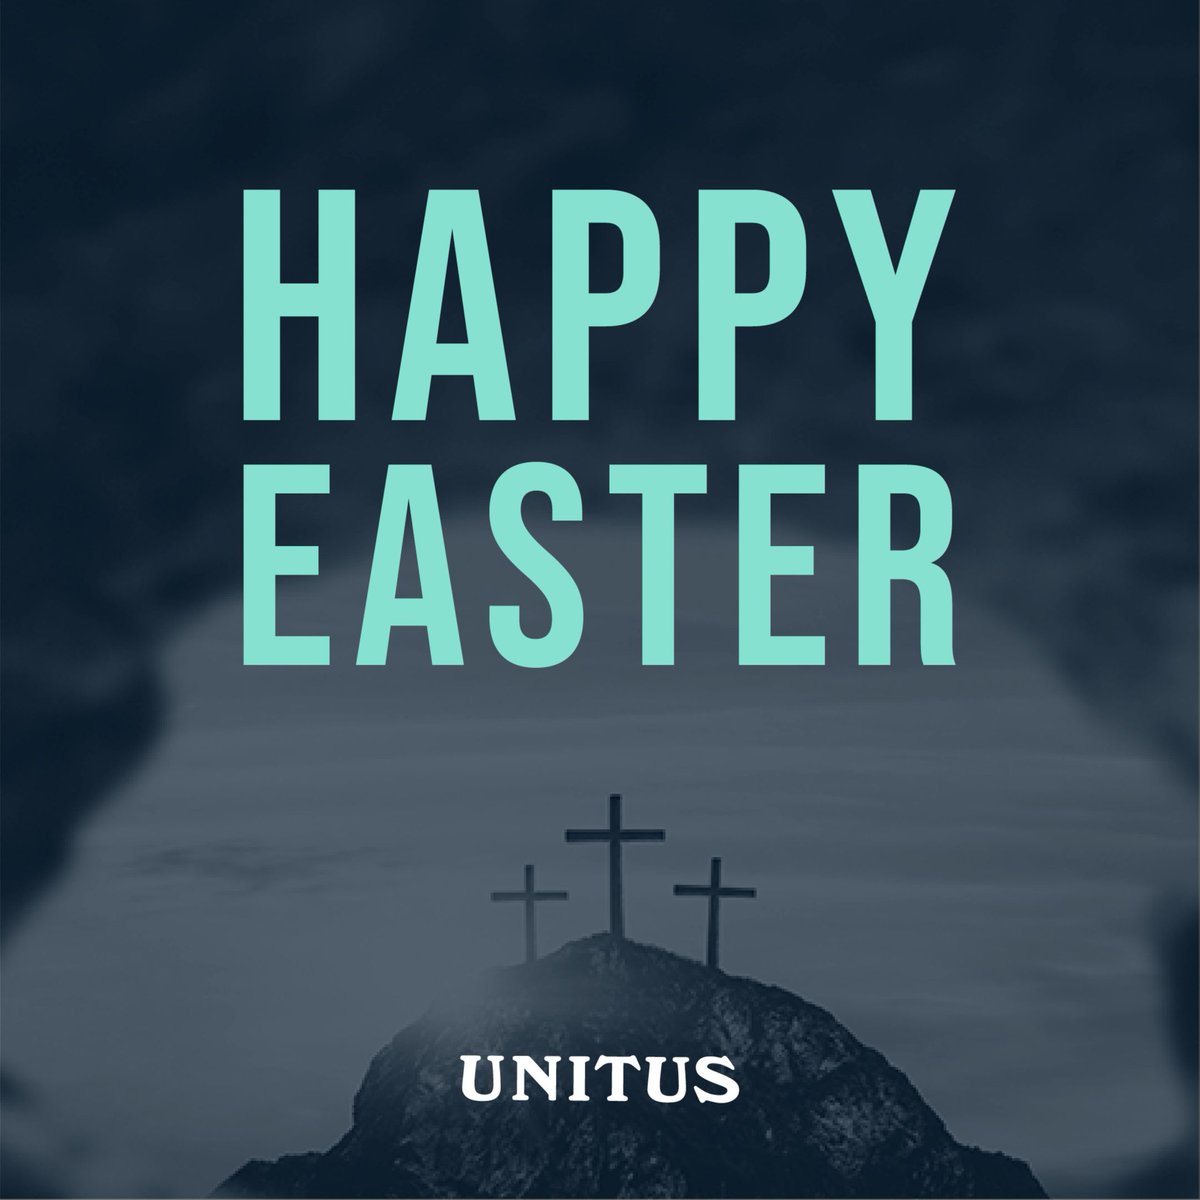 The resurrection changes everything. Because Jesus Christ lived, died, and rose from the grave, we have true freedom. Happy Easter from UNITUS!